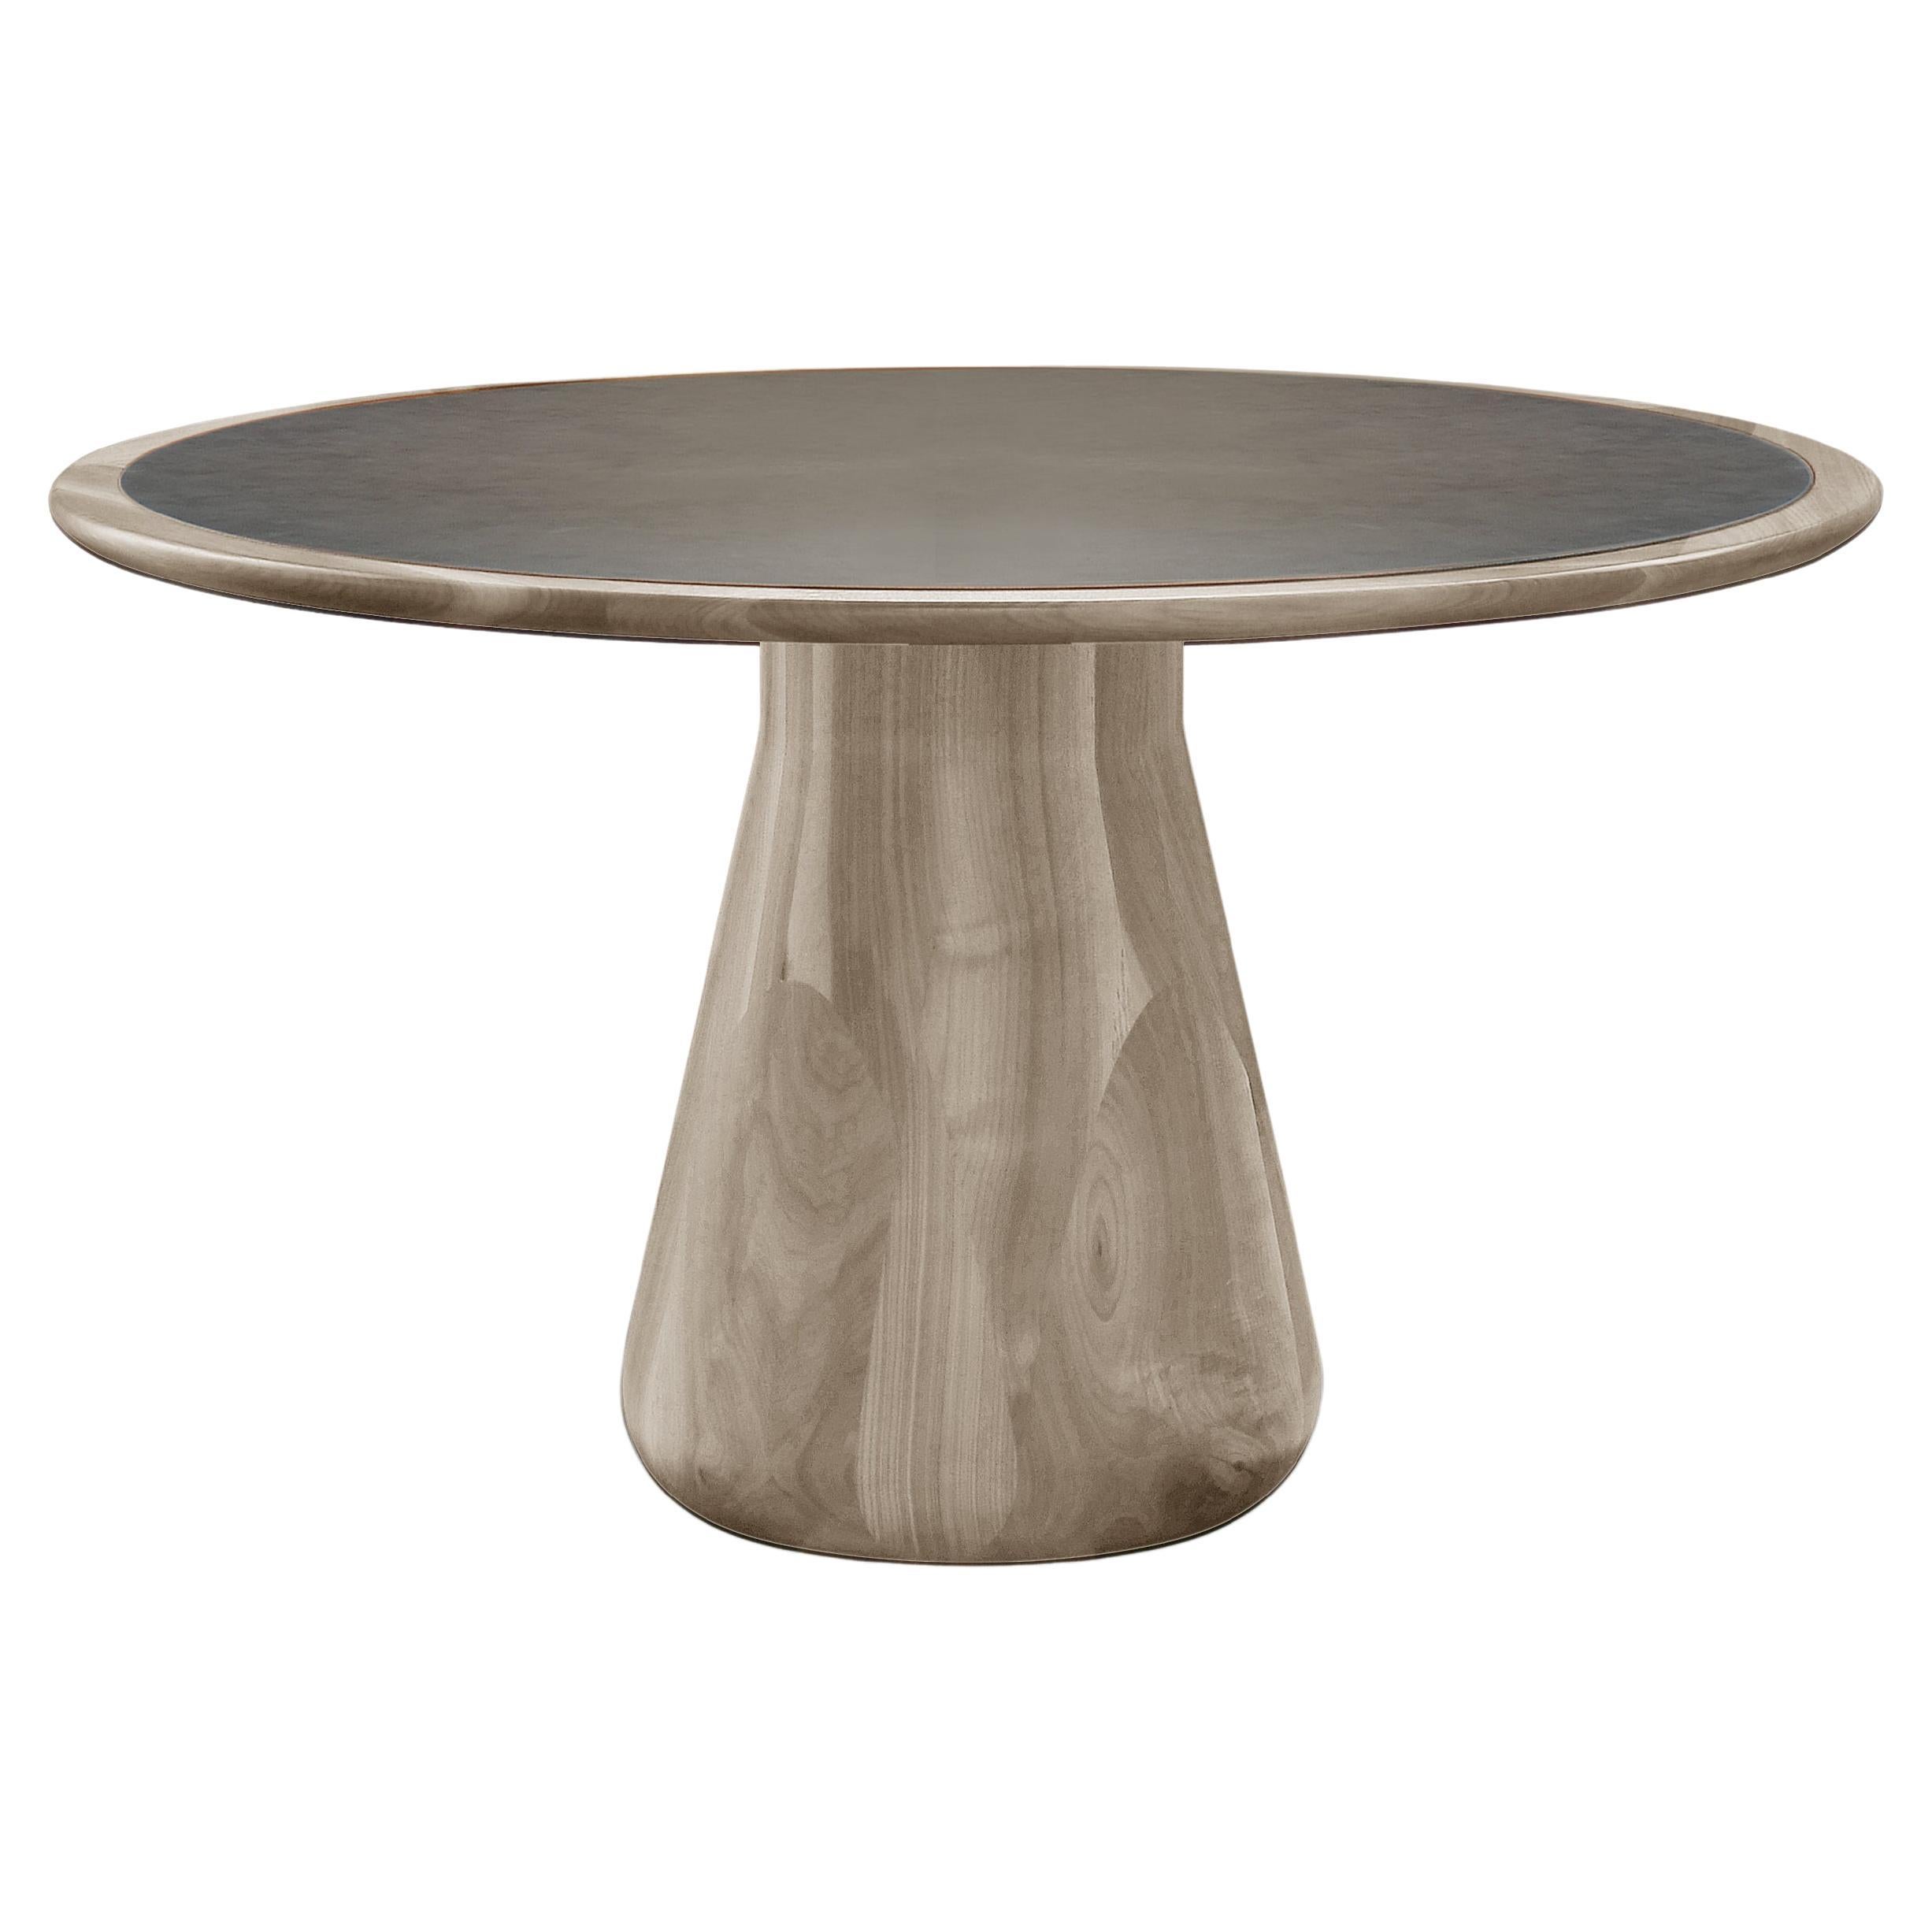 Convivio Solid Wood Table, Walnut in Hand-Made Natural Grey Finish, Contemporary